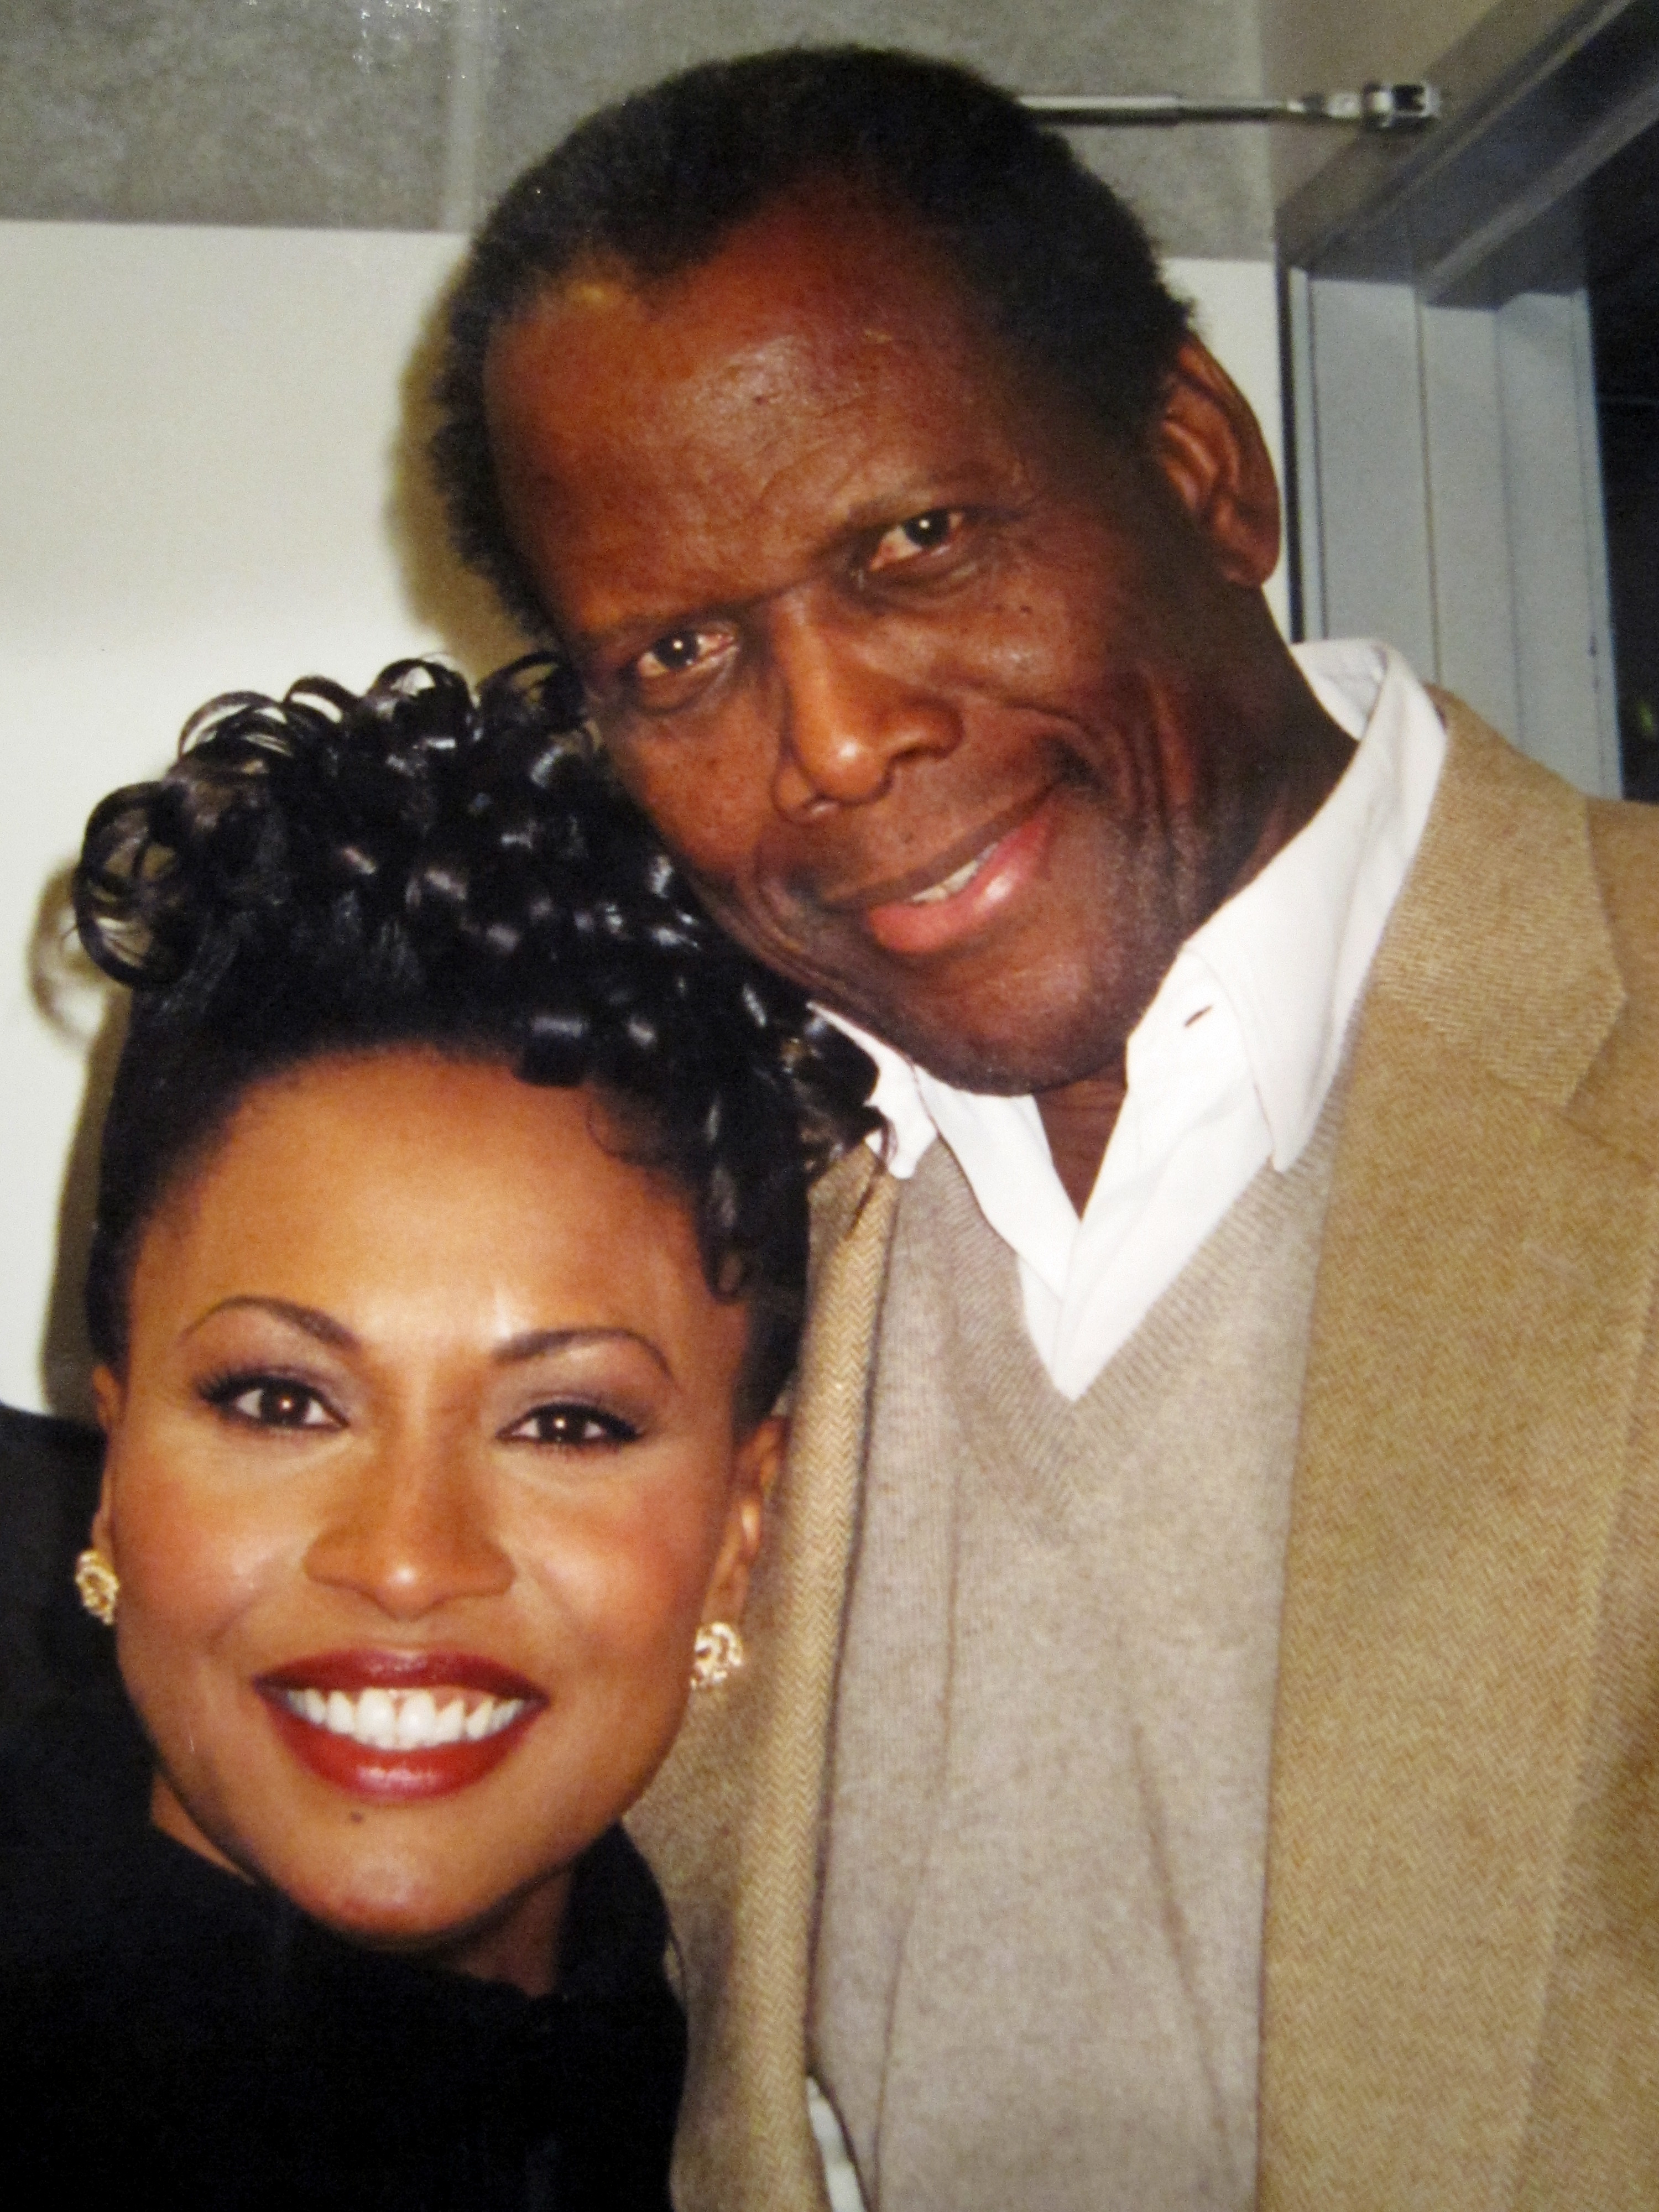 Mr. Poitier greets Ms. Lewis backstage after her one woman show.